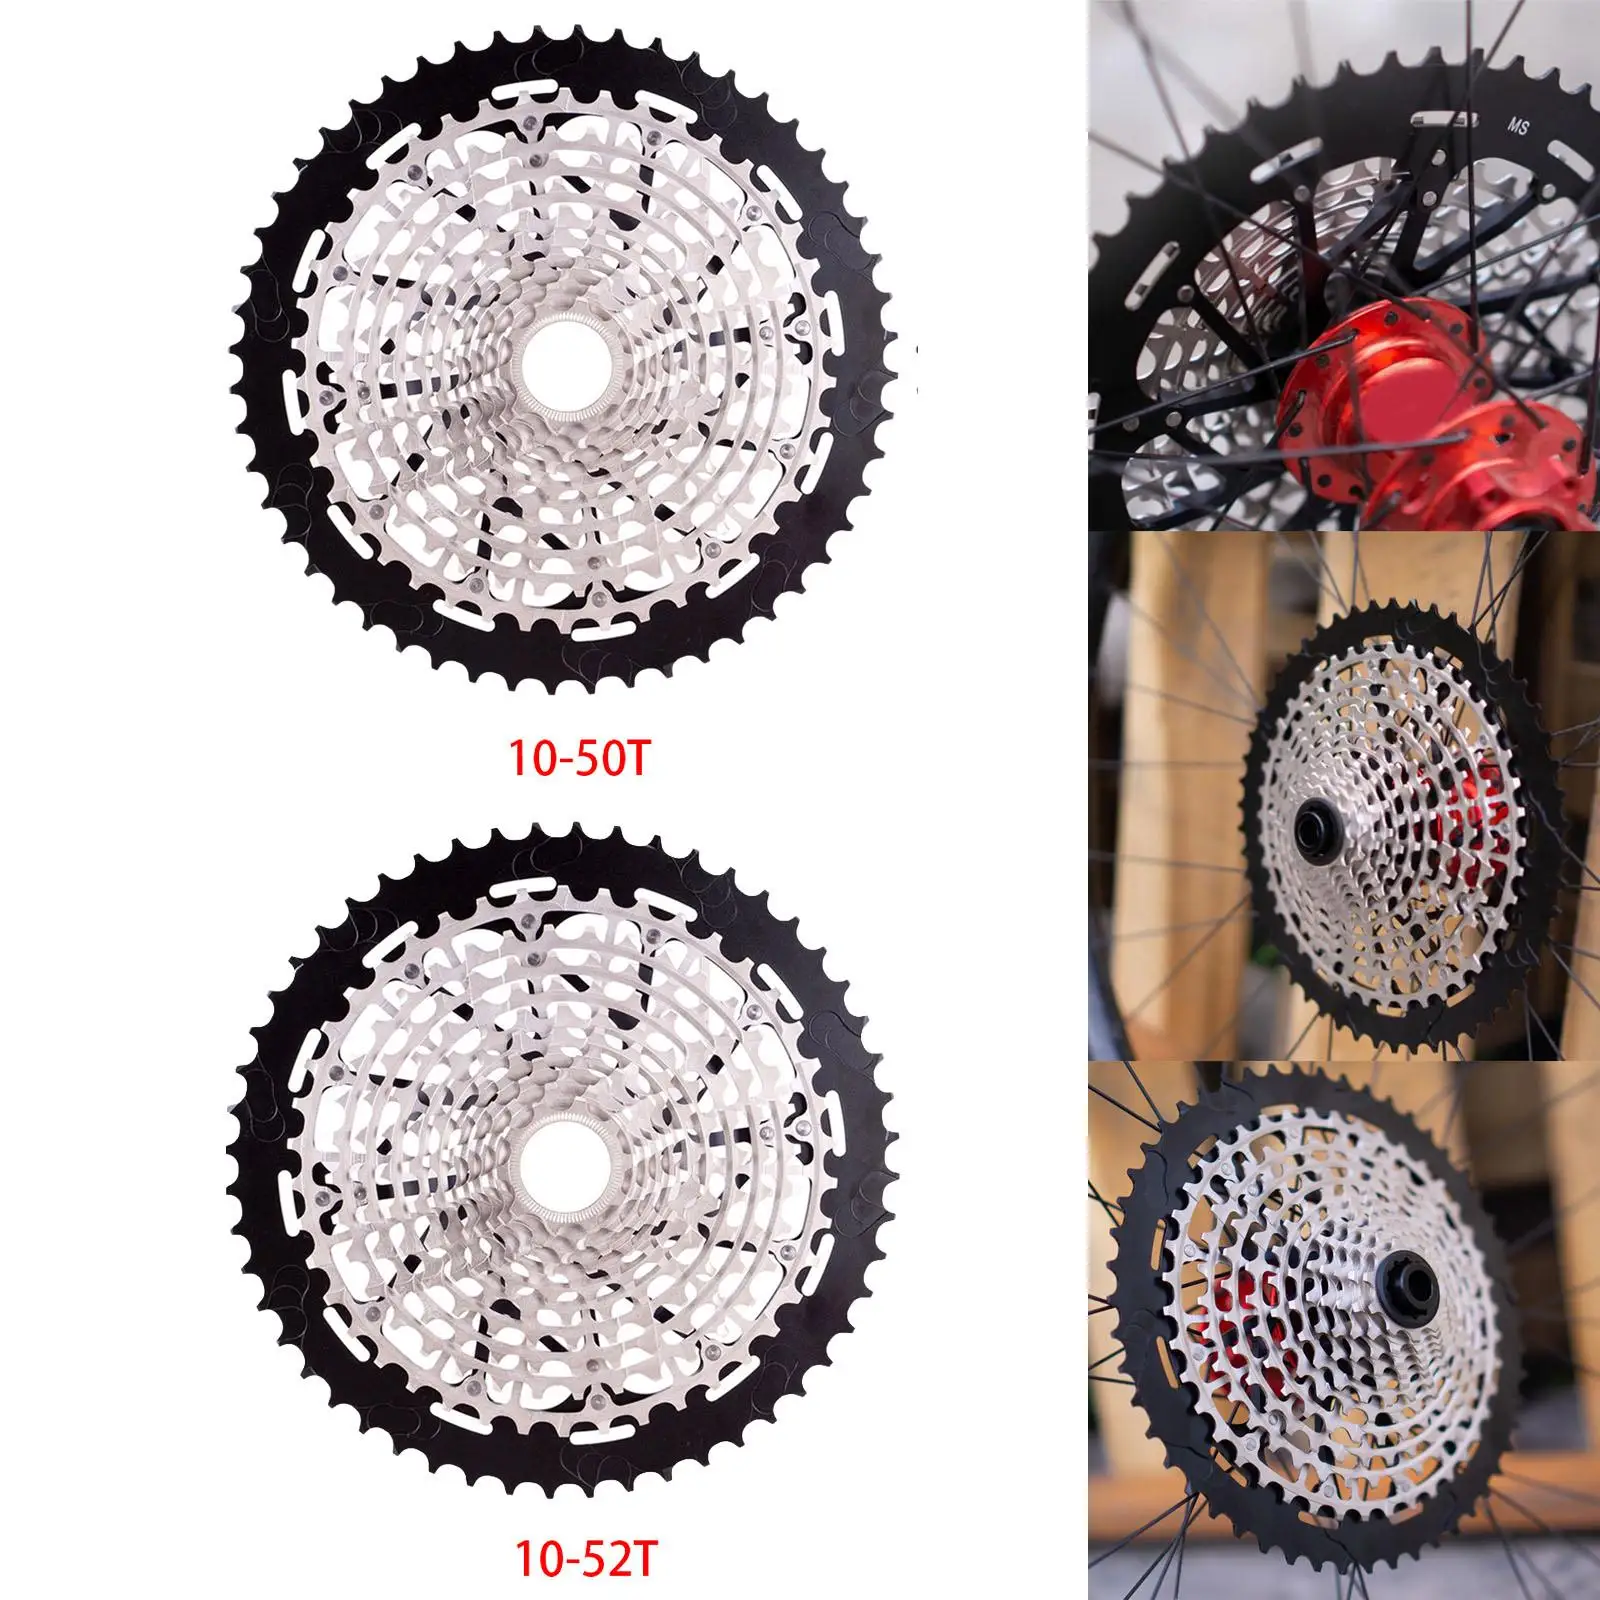 1 Piece Steel Bike Cassette, MTB  Store Smooth 12 Speed Freewheel for Deore M7100 M8100  XTR M9100 Cycling Accessories